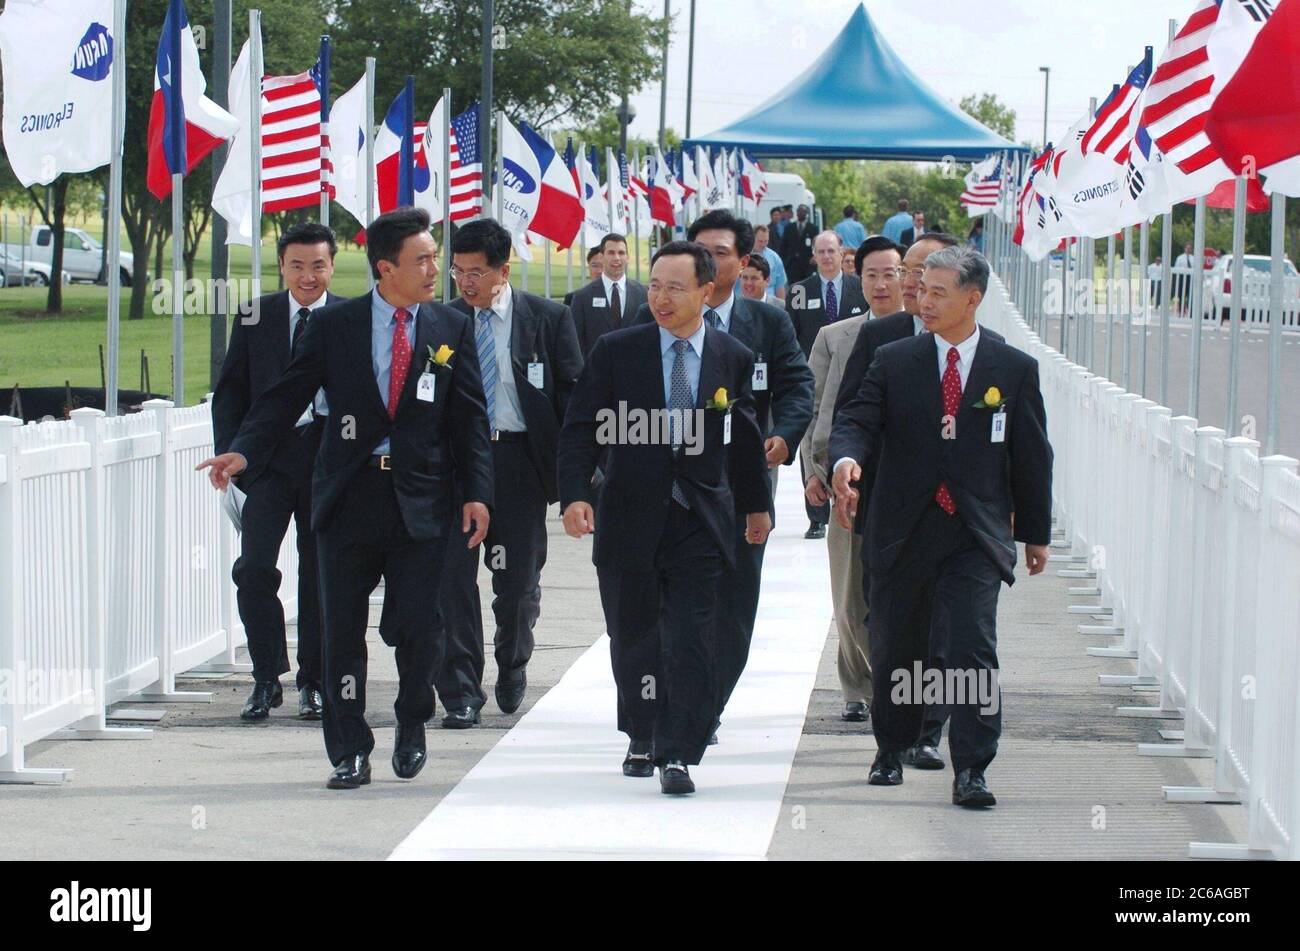 Austin Texas USA, July 23 2004: Samsung executives, including Samsung Semiconductor President Y.W. Lee (center) walk to groundbreaking ceremonies for a $500 million expansion to the company's Austin chip fabrication facility.  ©Bob Daemmrich Stock Photo